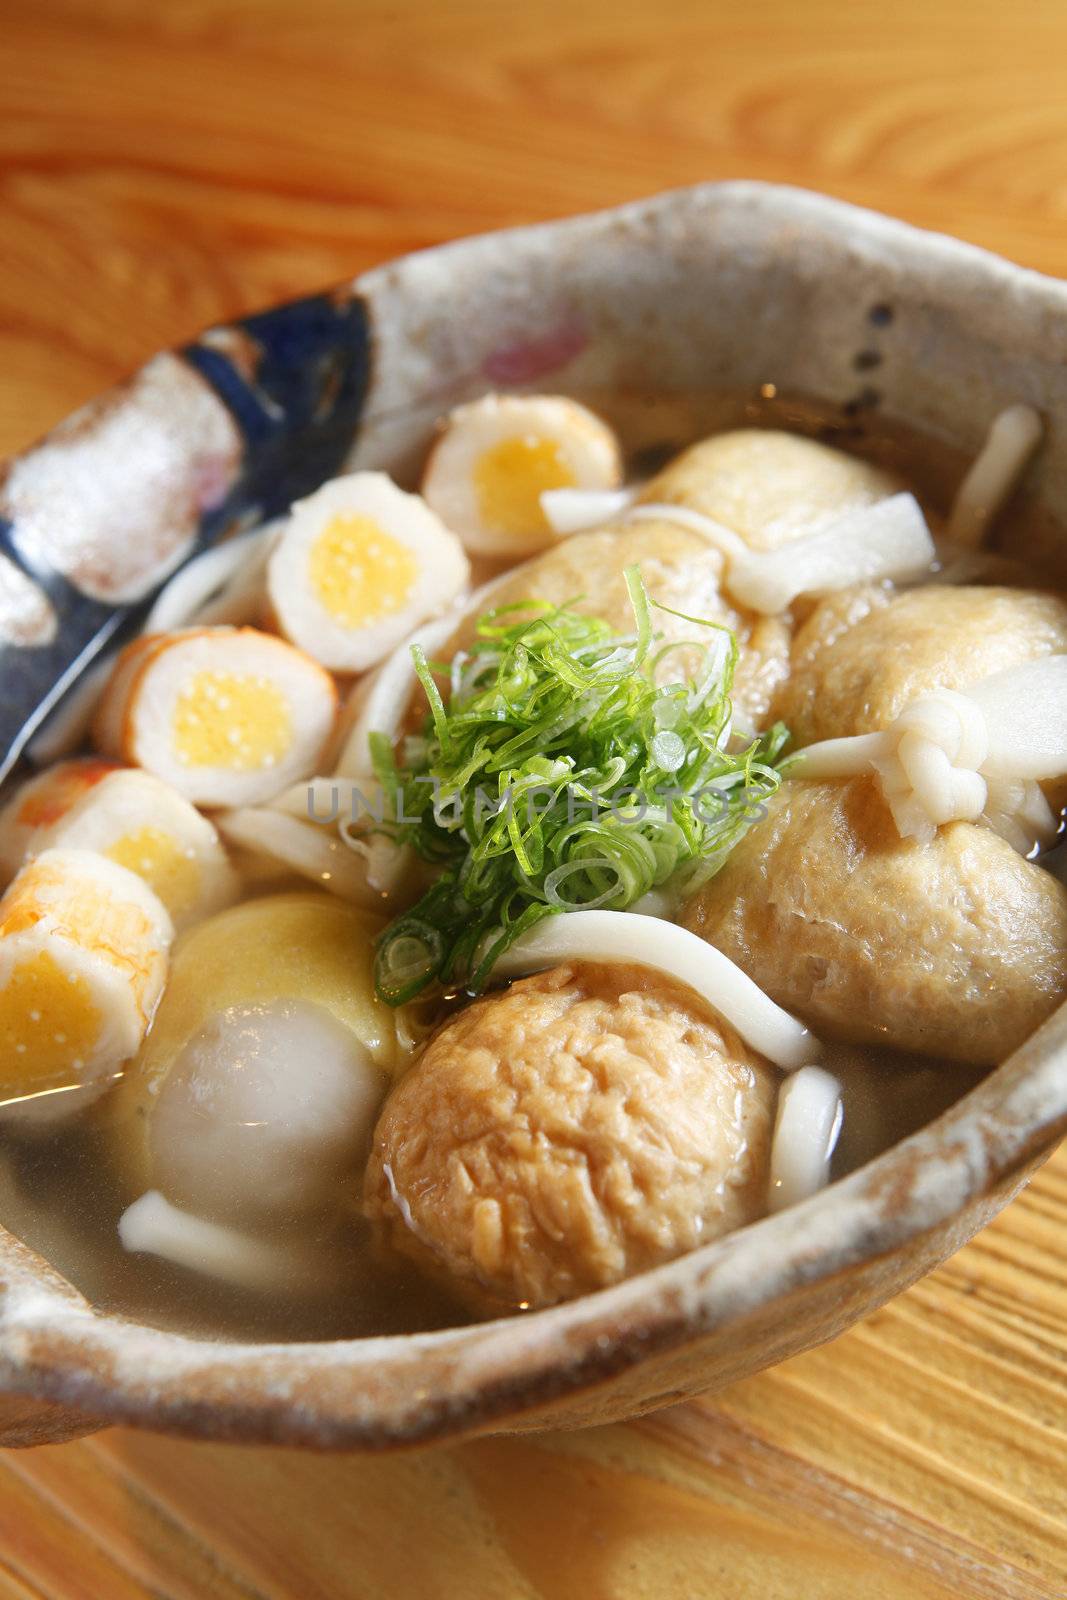 Noodle with onion and dumpling.